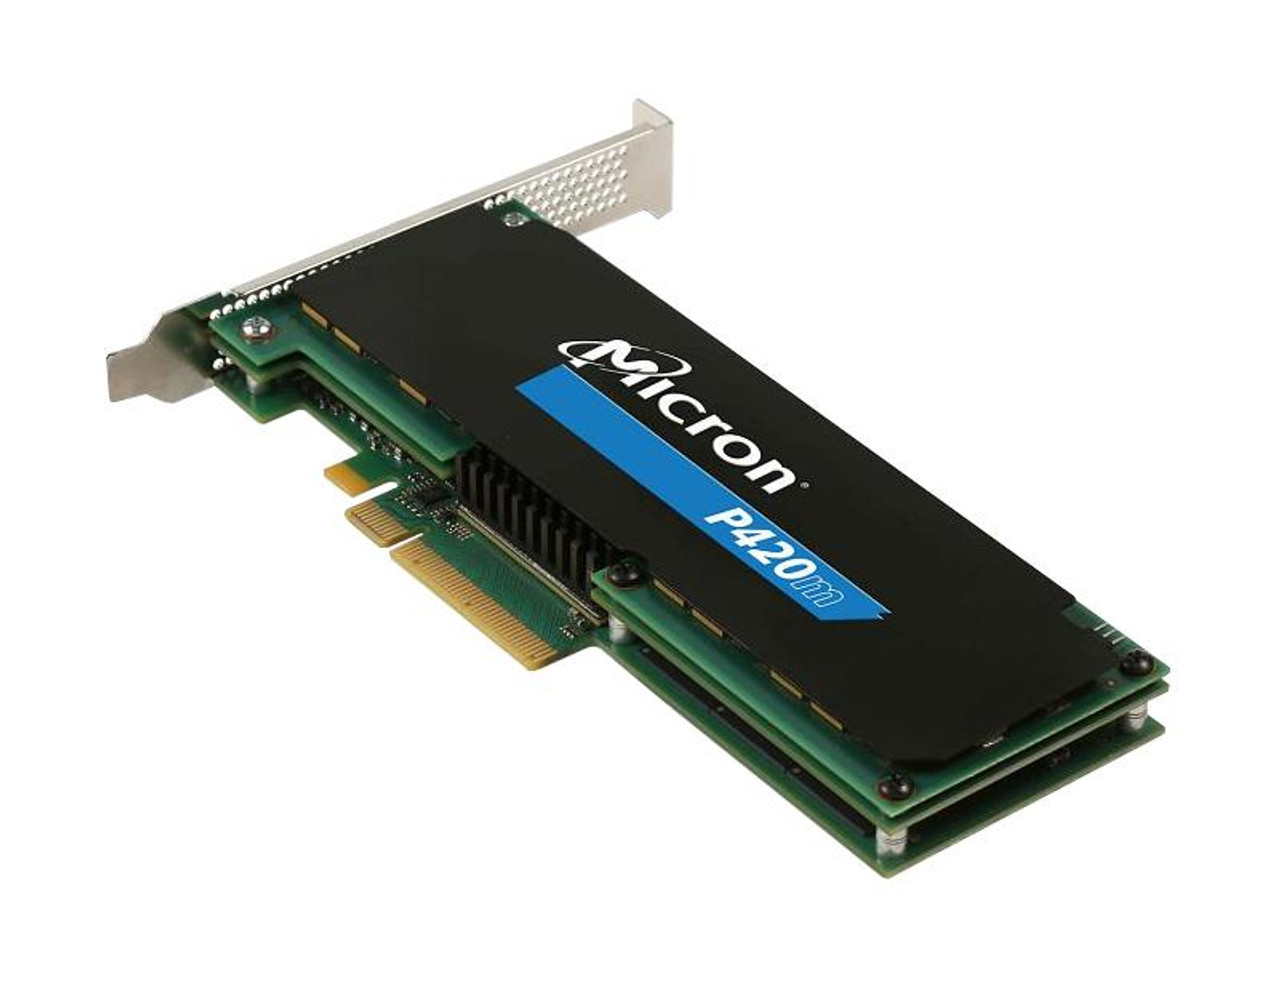 MTFDGAR700MAX-1AG13A Micron P420m 700GB MLC PCI Express 2.0 x8 (Bootable) HH-HL Add-in Card Solid State Drive (SSD)